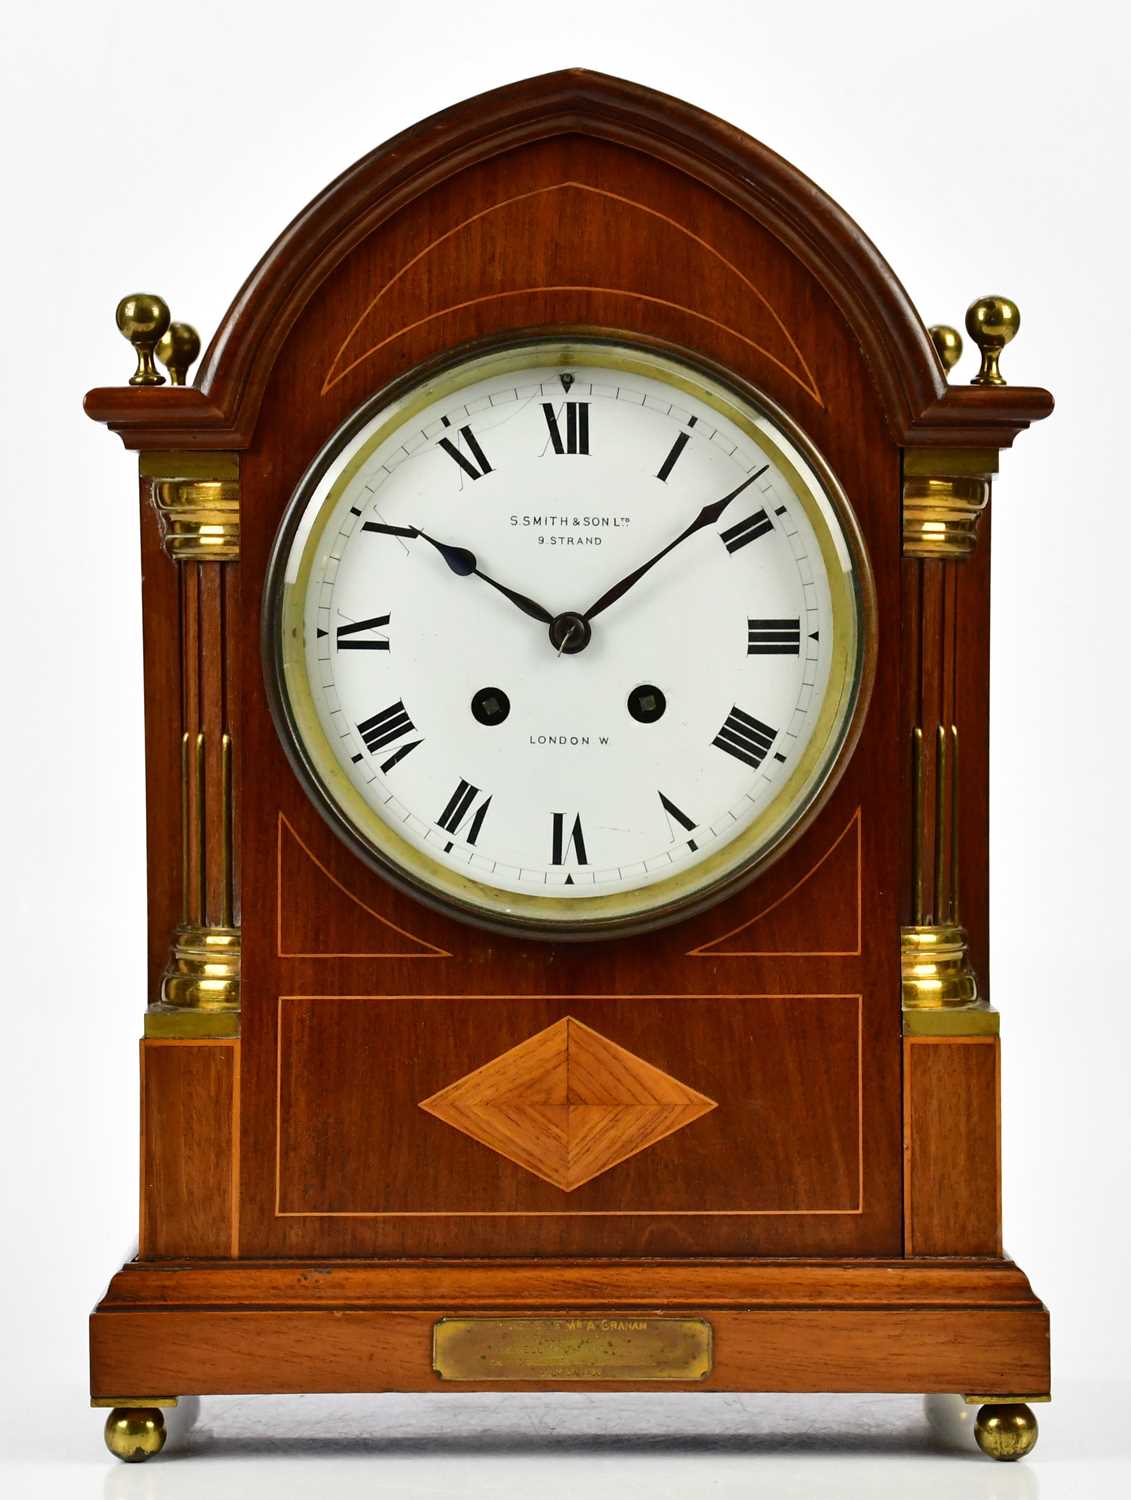 S SMITH & SONS LTD, LONDON; an Edwardian inlaid mahogany arch topped mantel clock with four brass